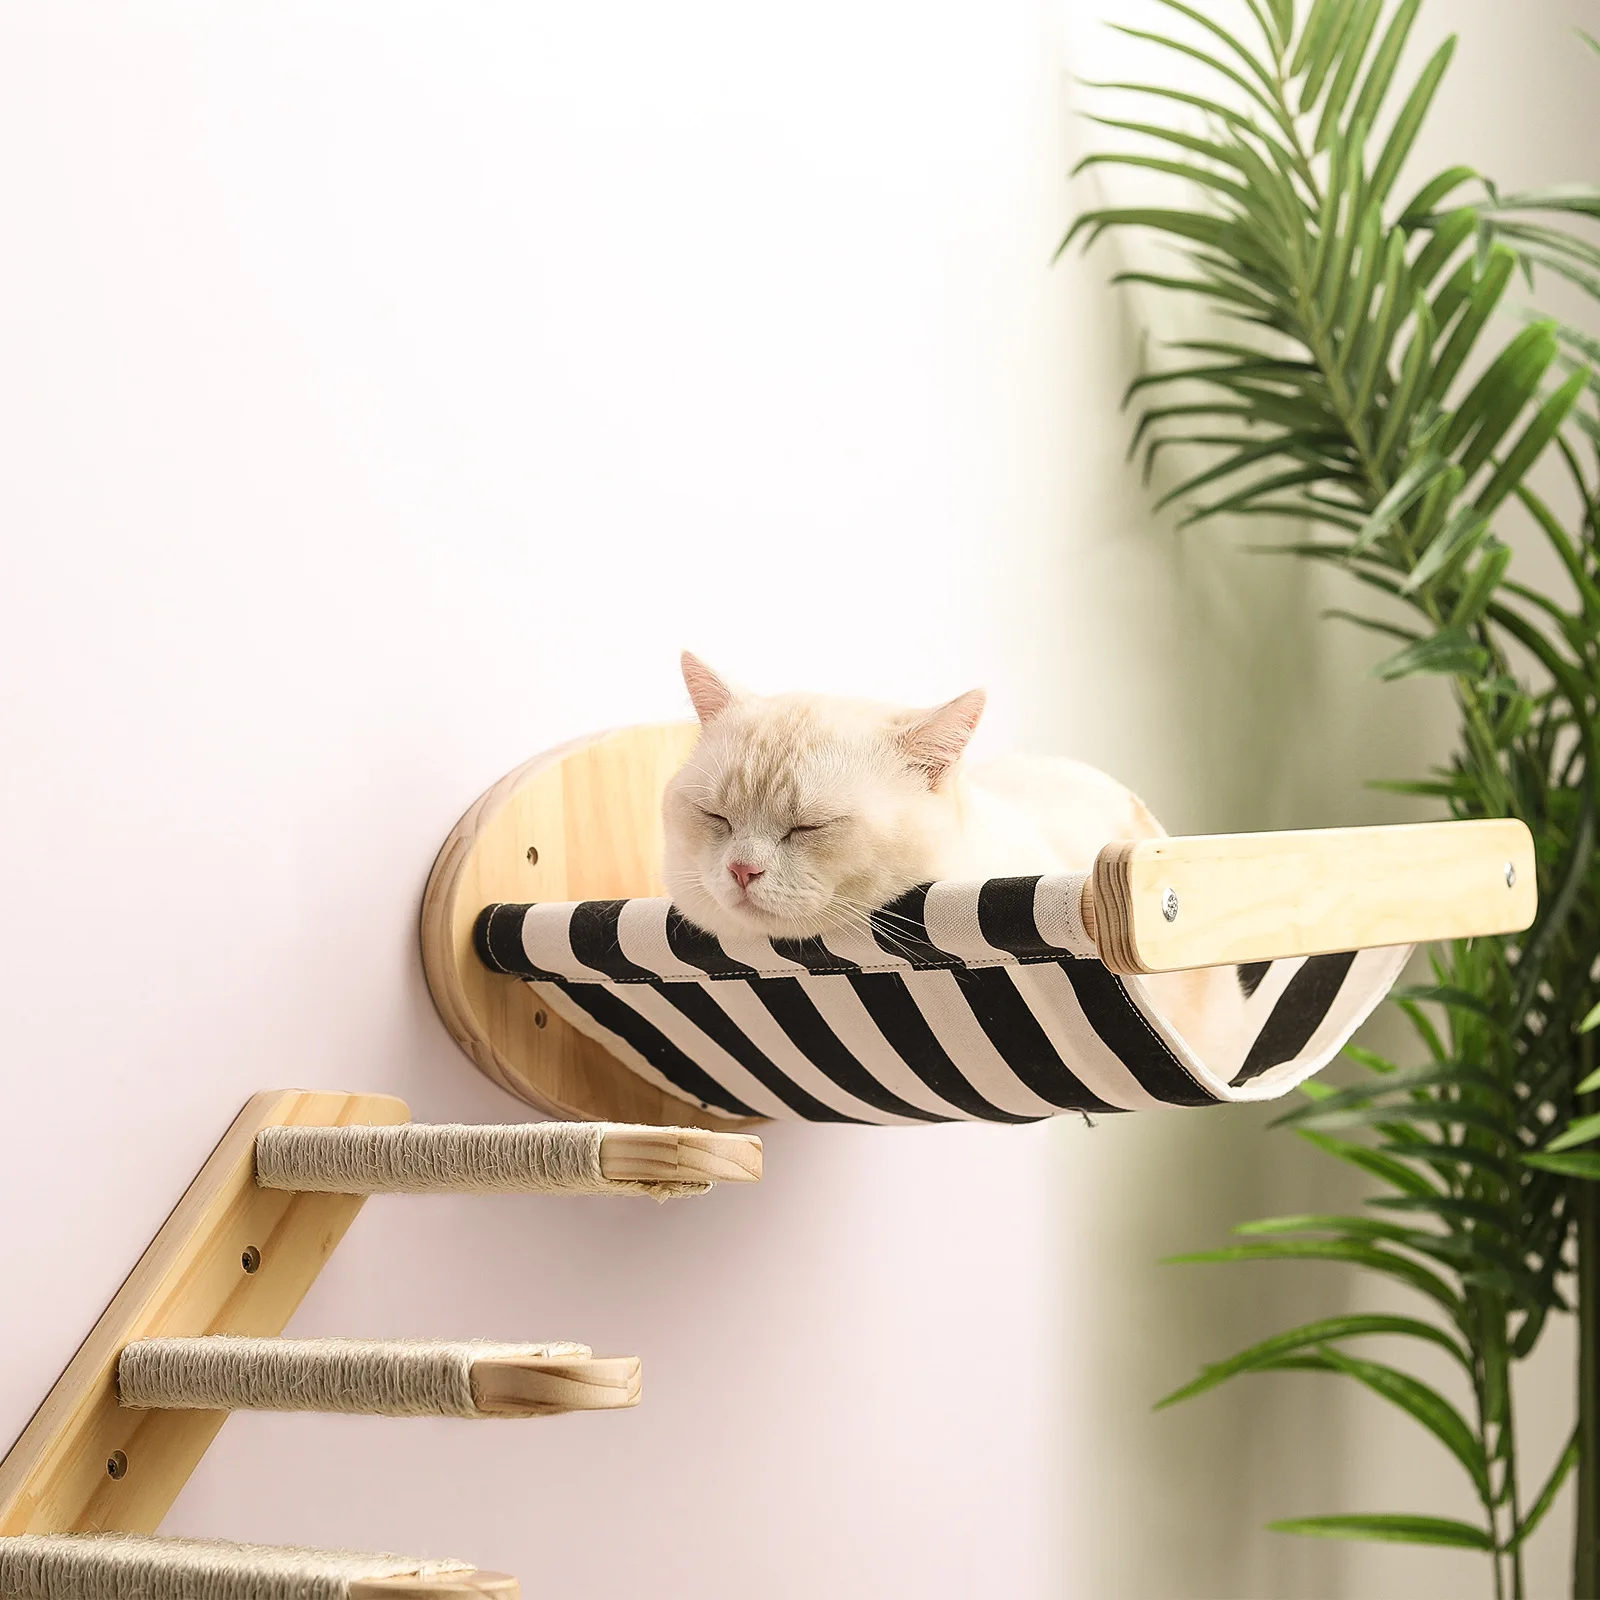 

Cat Hammock and Climbing Stairway Wall Mounted Wooden Cat Furniture Bed Perch and Sleeping Playing for Kitten Jumping Furniture